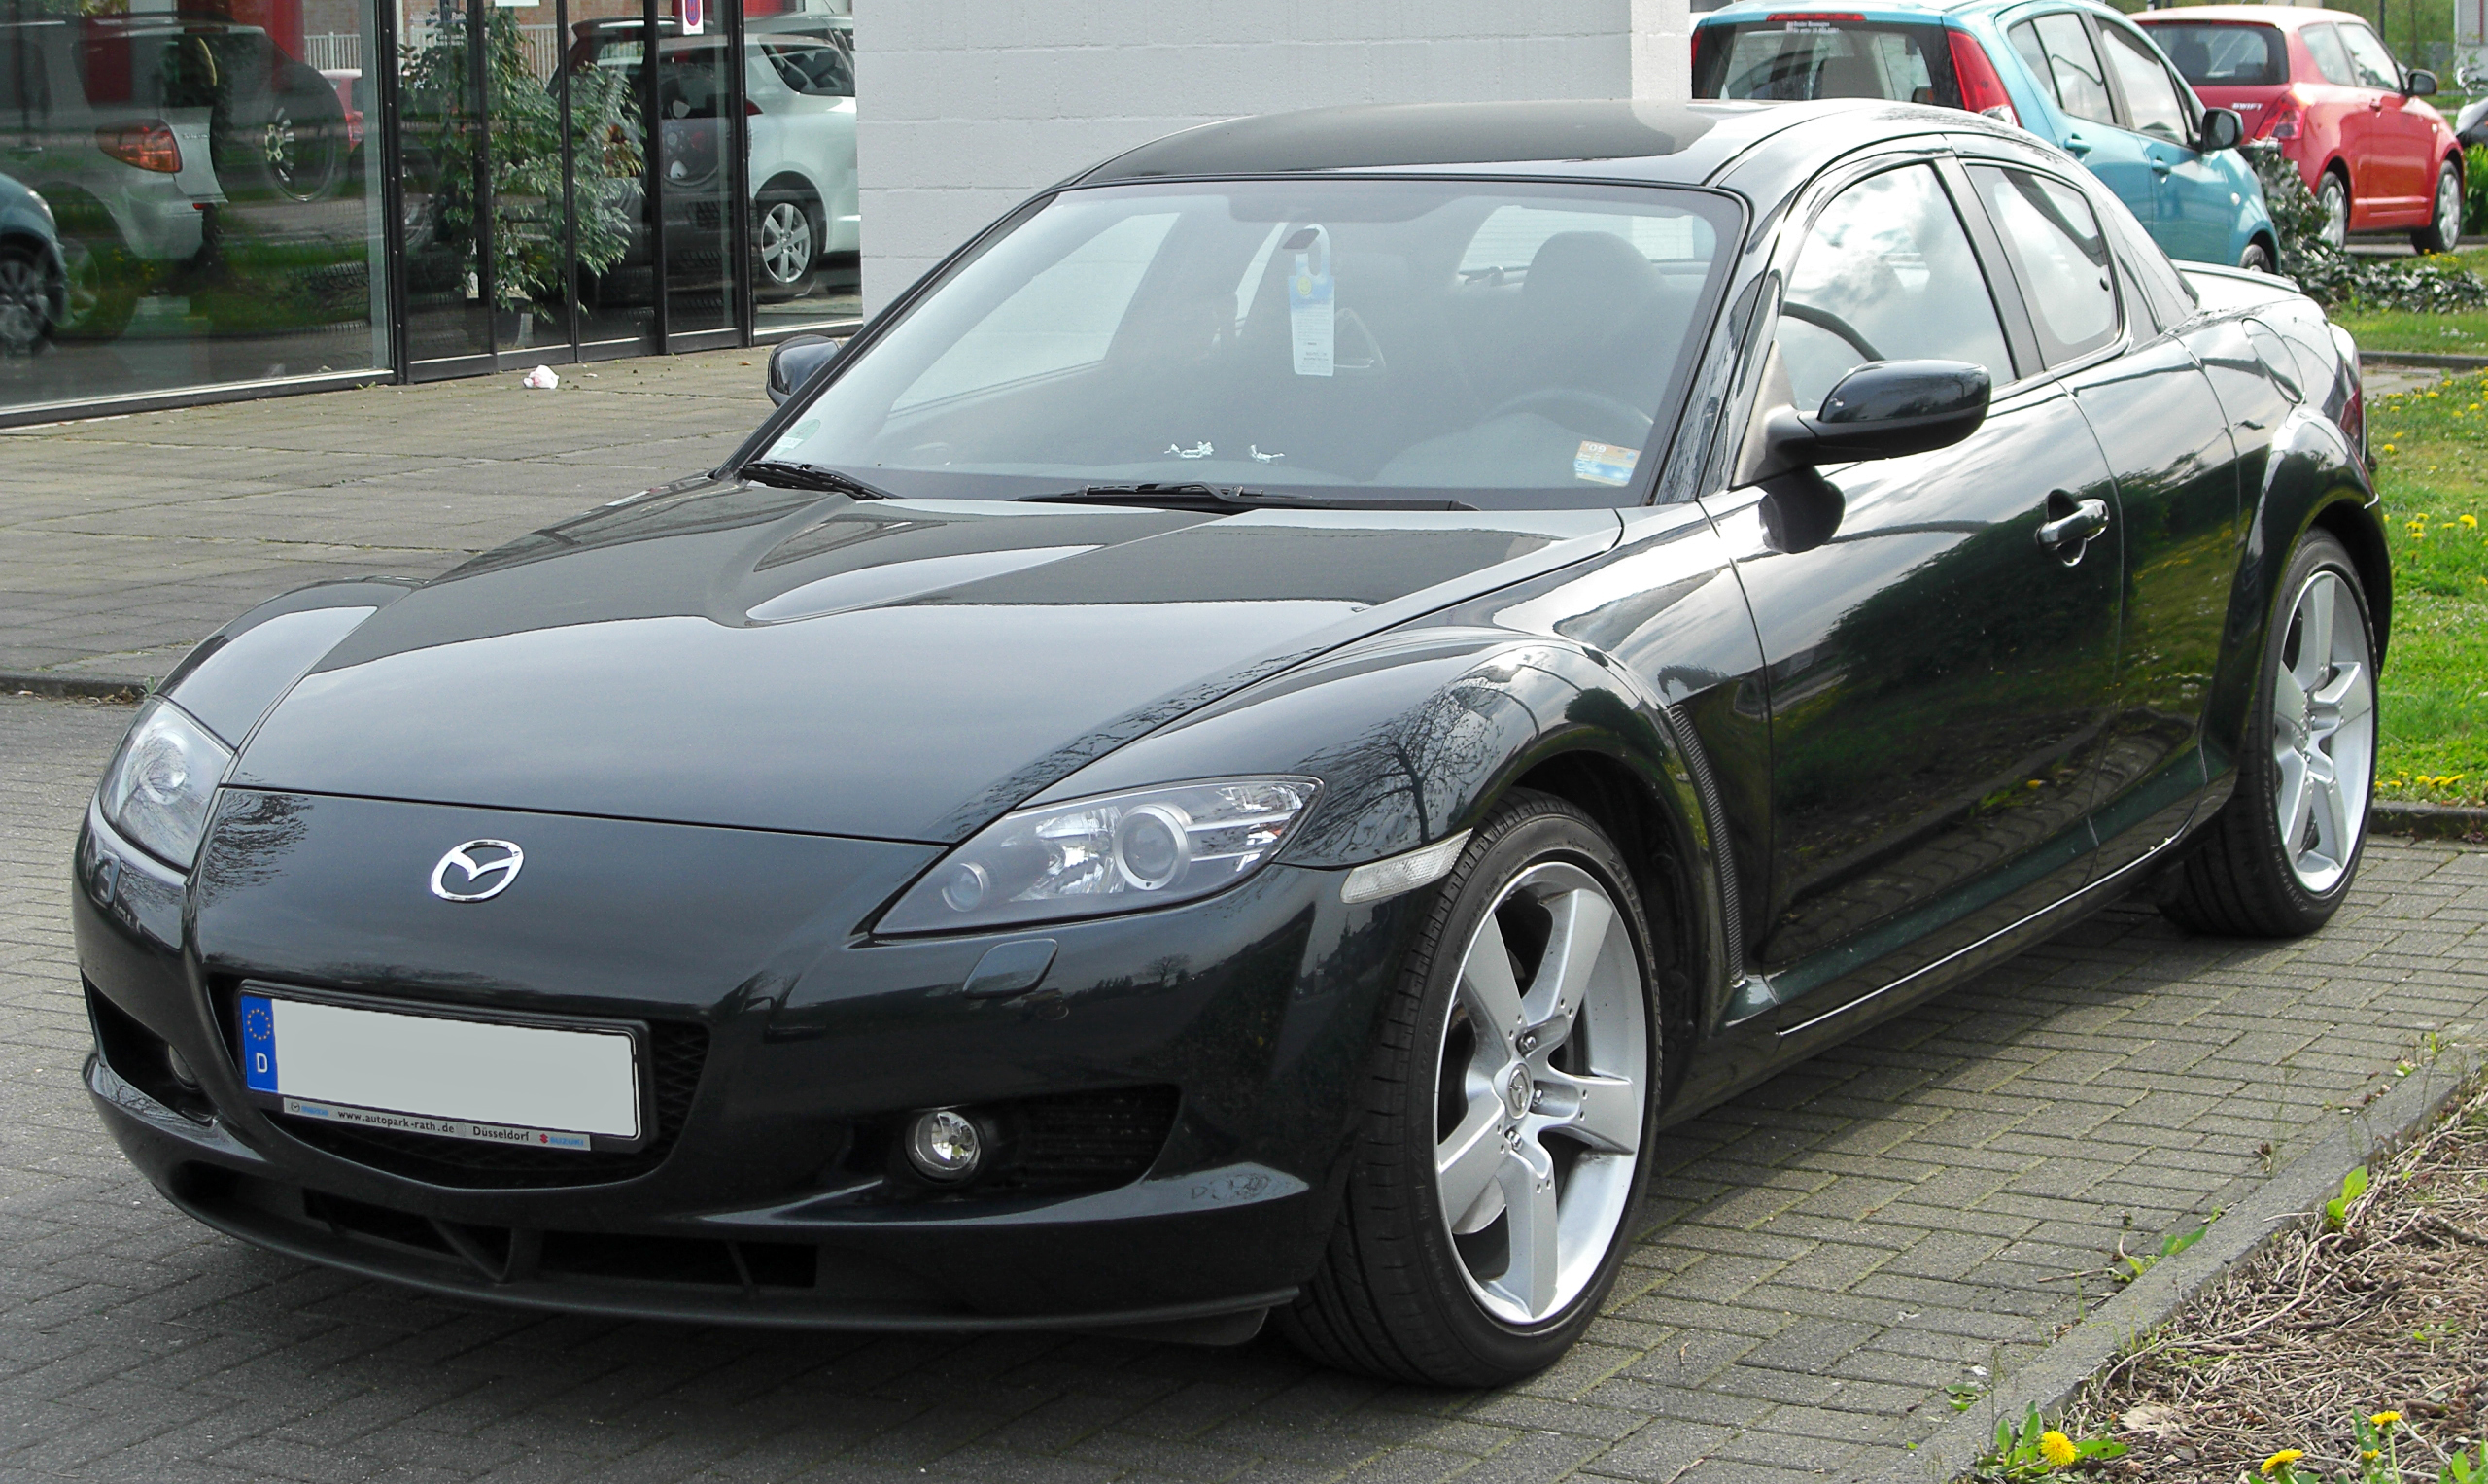 File:Mazda RX-8 front-1 20100425.jpg - Wikimedia Commons